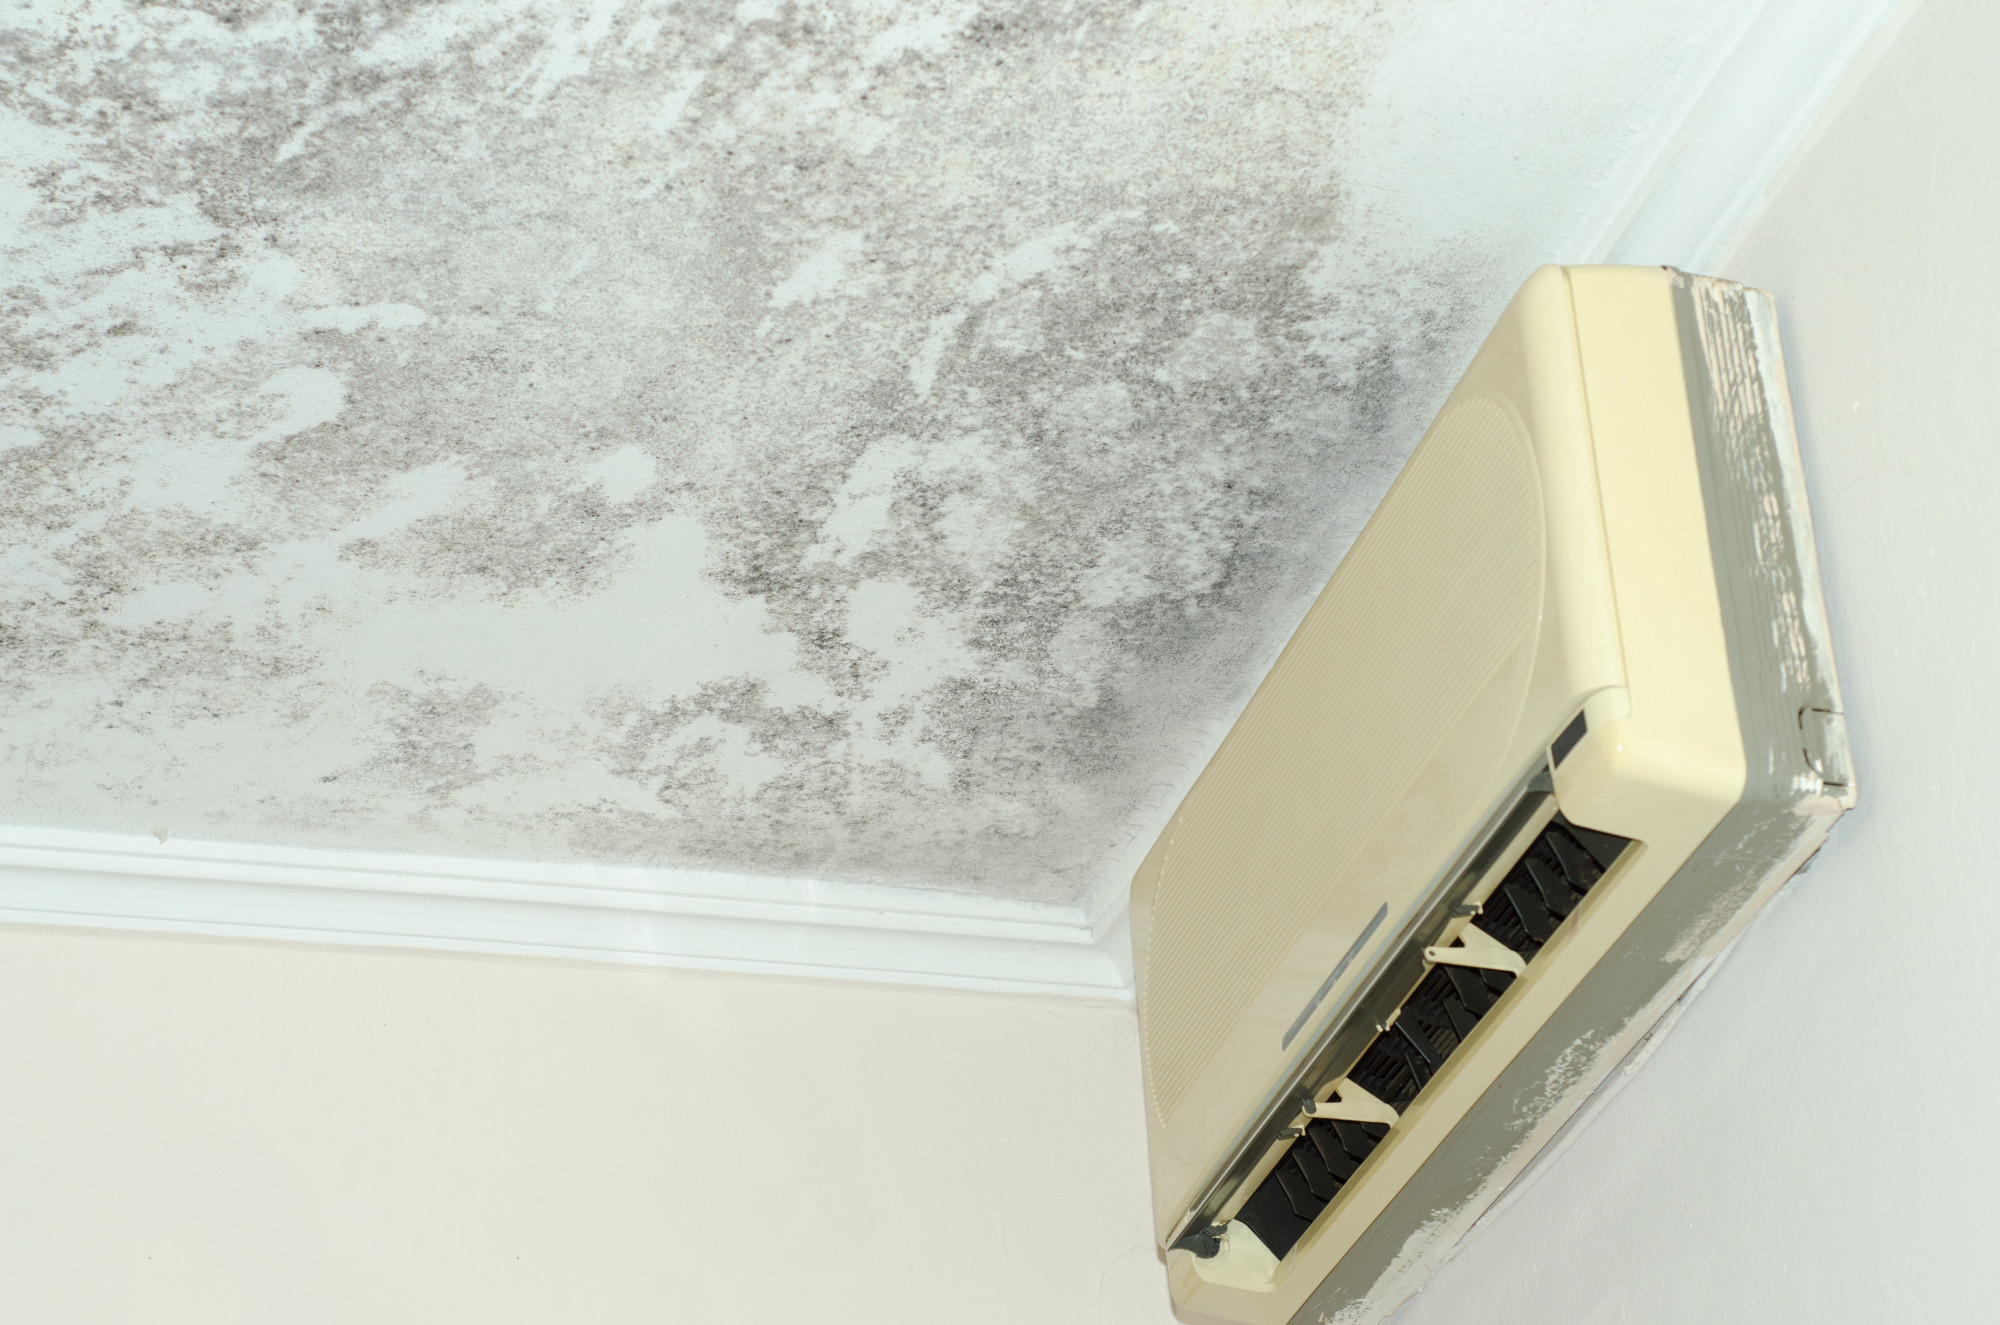 Black Mold Causes in the Home and How To Prevent It